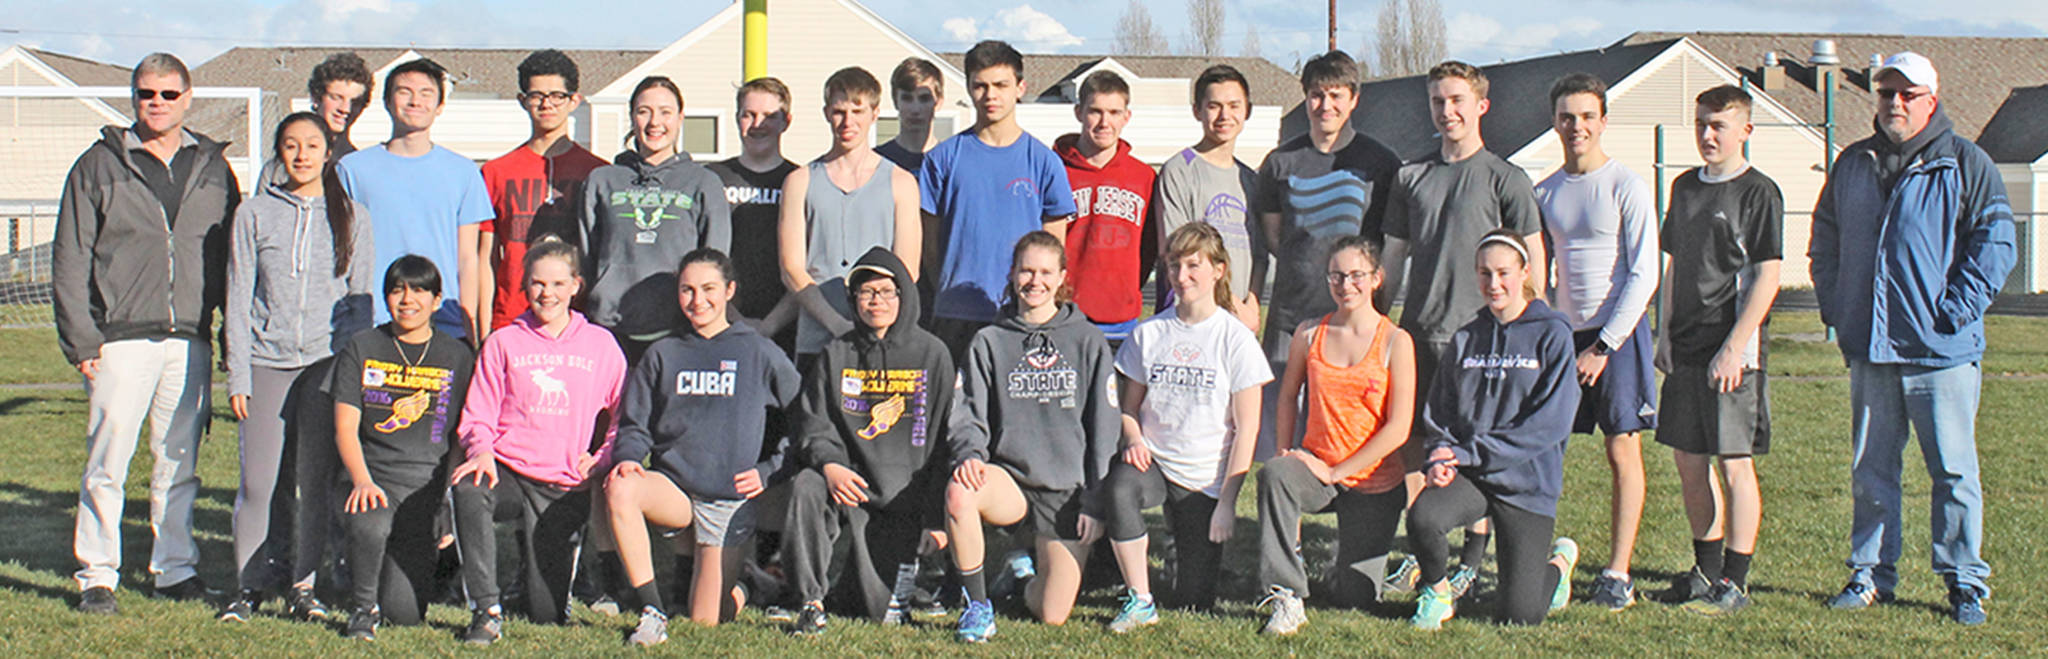 Track athletes to hit ‘stride’ this season | Spring sports preview